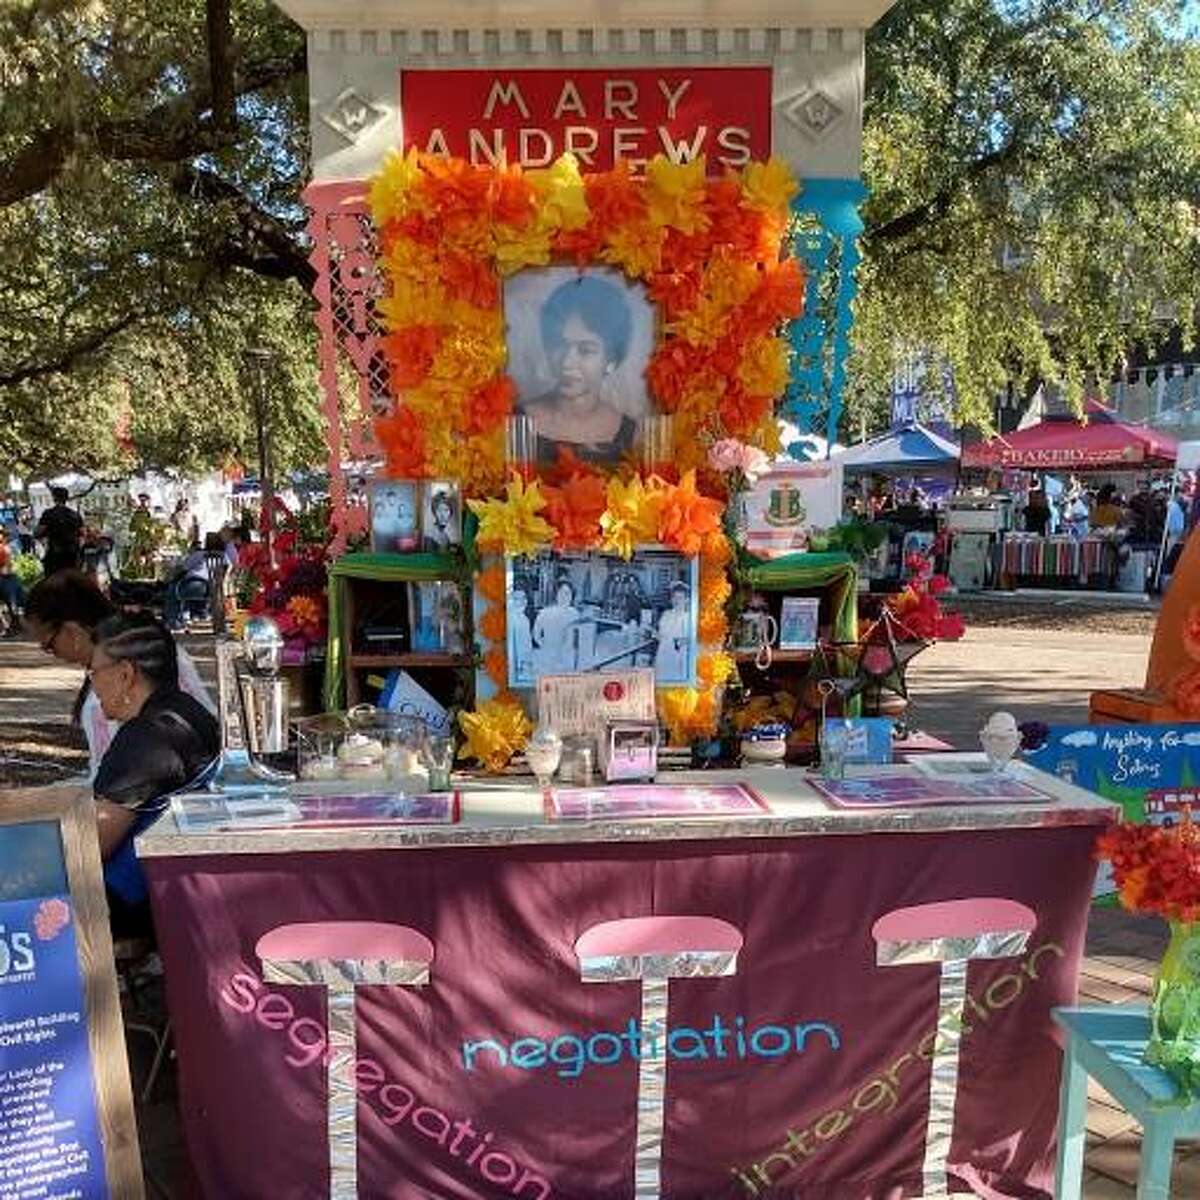 The Coalition for the Woolworth Building set up an altar at the 7th Annual Día de los Muertos Fest at Hemisfair in honor of the Woolworth Building's integrated lunch counter. The altar had a photograph of  Mary Andrews, who was a freshman at Our Lady of the Lake University and president of the NAACP’s local youth group when she wrote to San Antonio’s downtown store managers in 1960 asking that they end segregation at their lunch counters.